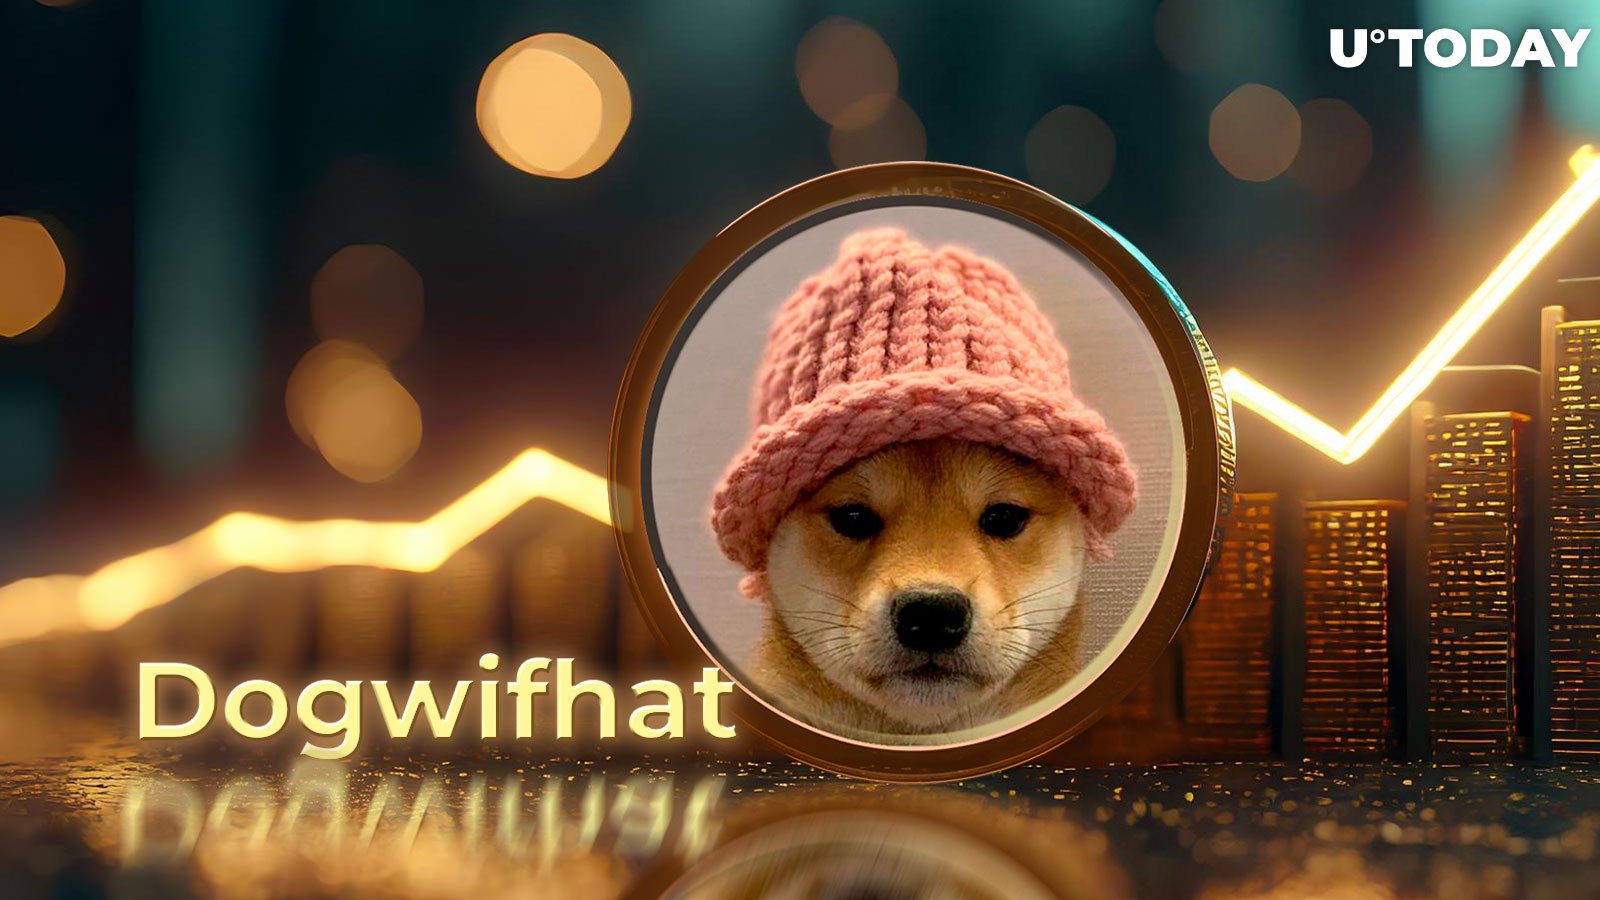 Dogwifhat (WIF) Skyrockets 103% in Volume - What's Happening?